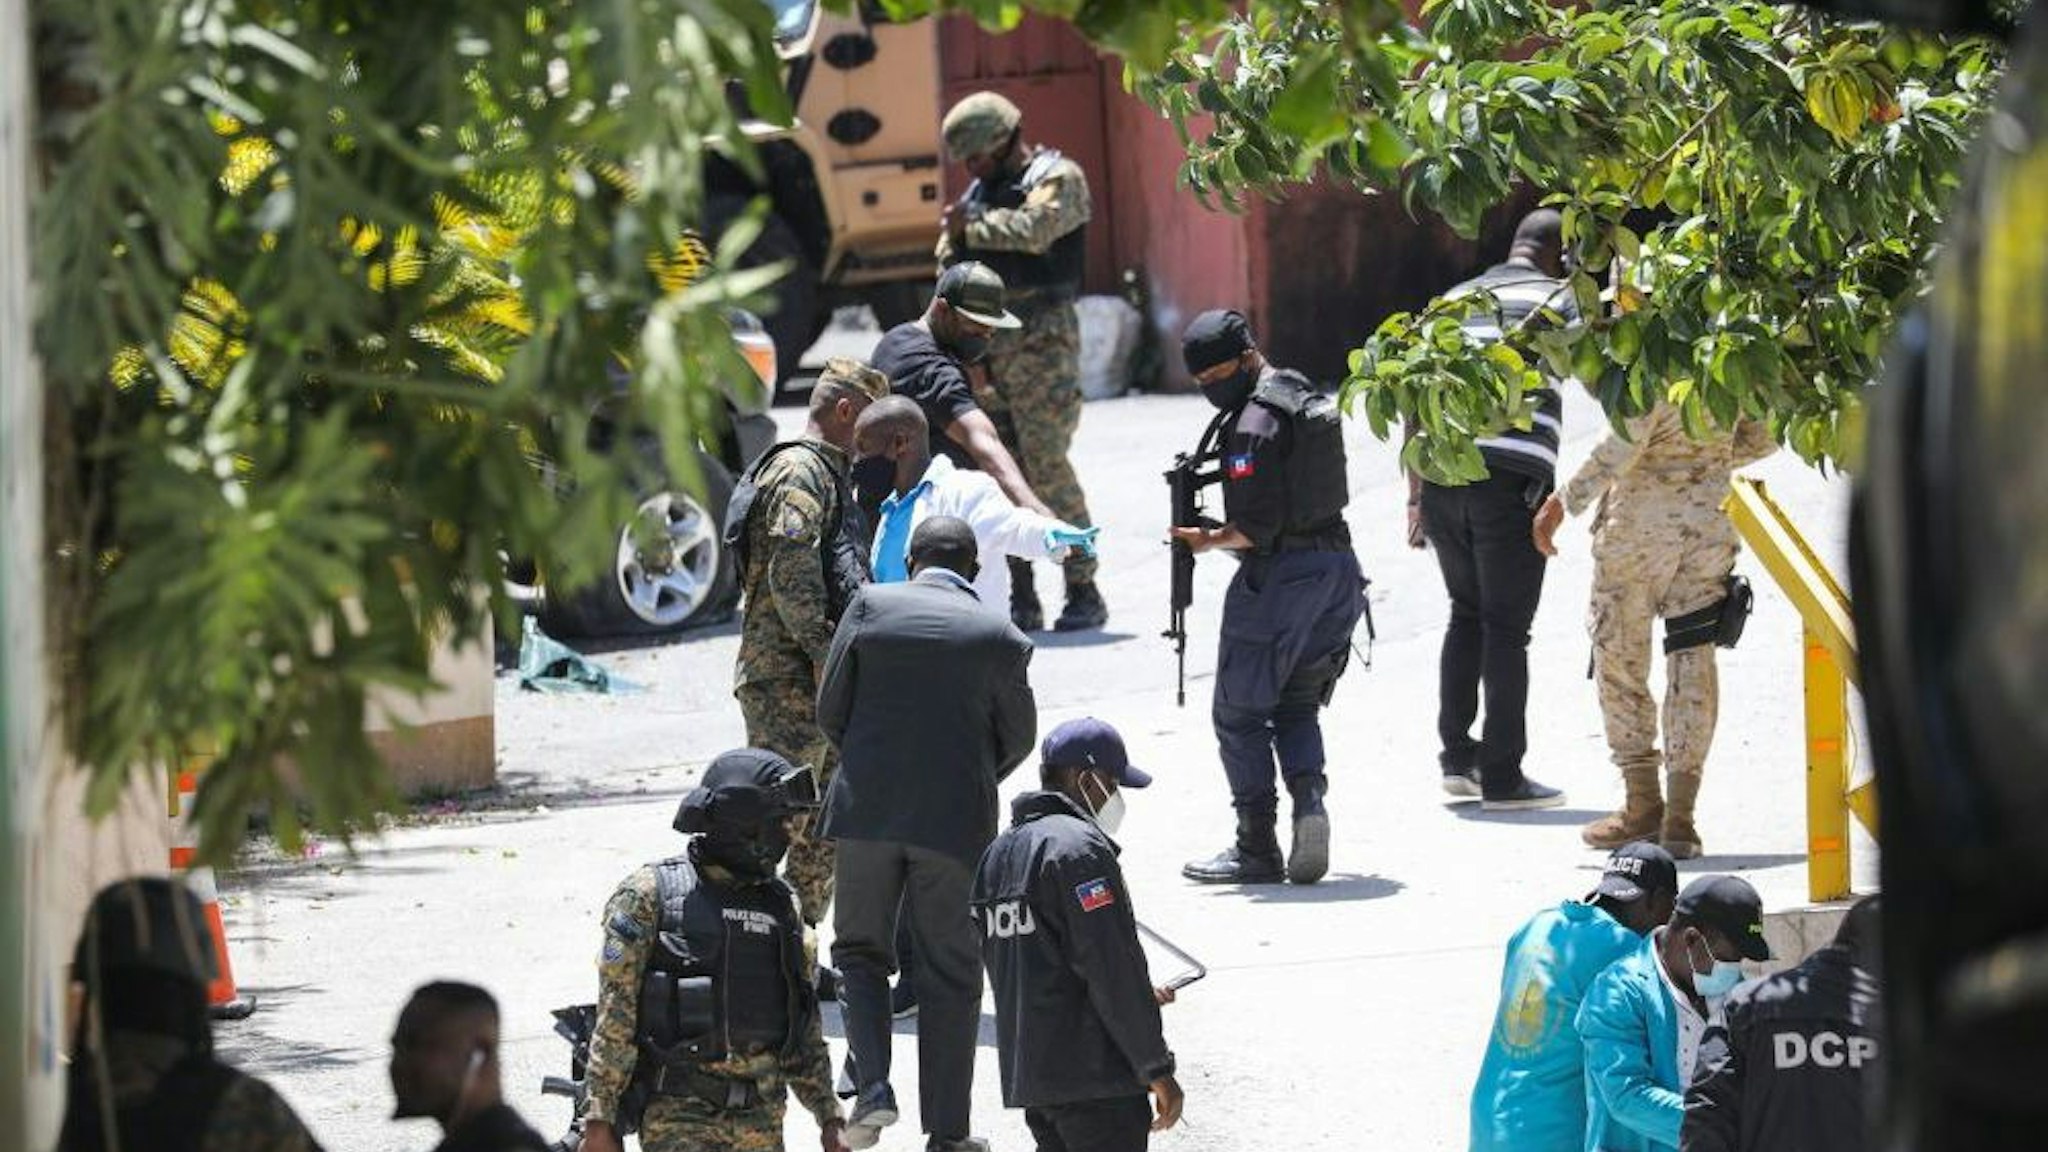 Members of the Haitian police and forensics look for evidence outside of the presidential residence on July 7, 2021 in Port-au-Prince, Haiti. - Haiti President Jovenel Moise was assassinated and his wife wounded early July 7, 2021 in an attack at their home, the interim prime minister announced, an act that risks further destabilizing the Caribbean nation beset by gang violence and political volatility. Claude Joseph said he was now in charge of the country and urged the public to remain calm, while insisting the police and army would ensure the population's safety.The capital Port-au-prince as quiet on Wednesday morning with no extra security forces on patrol, witnesses reported.